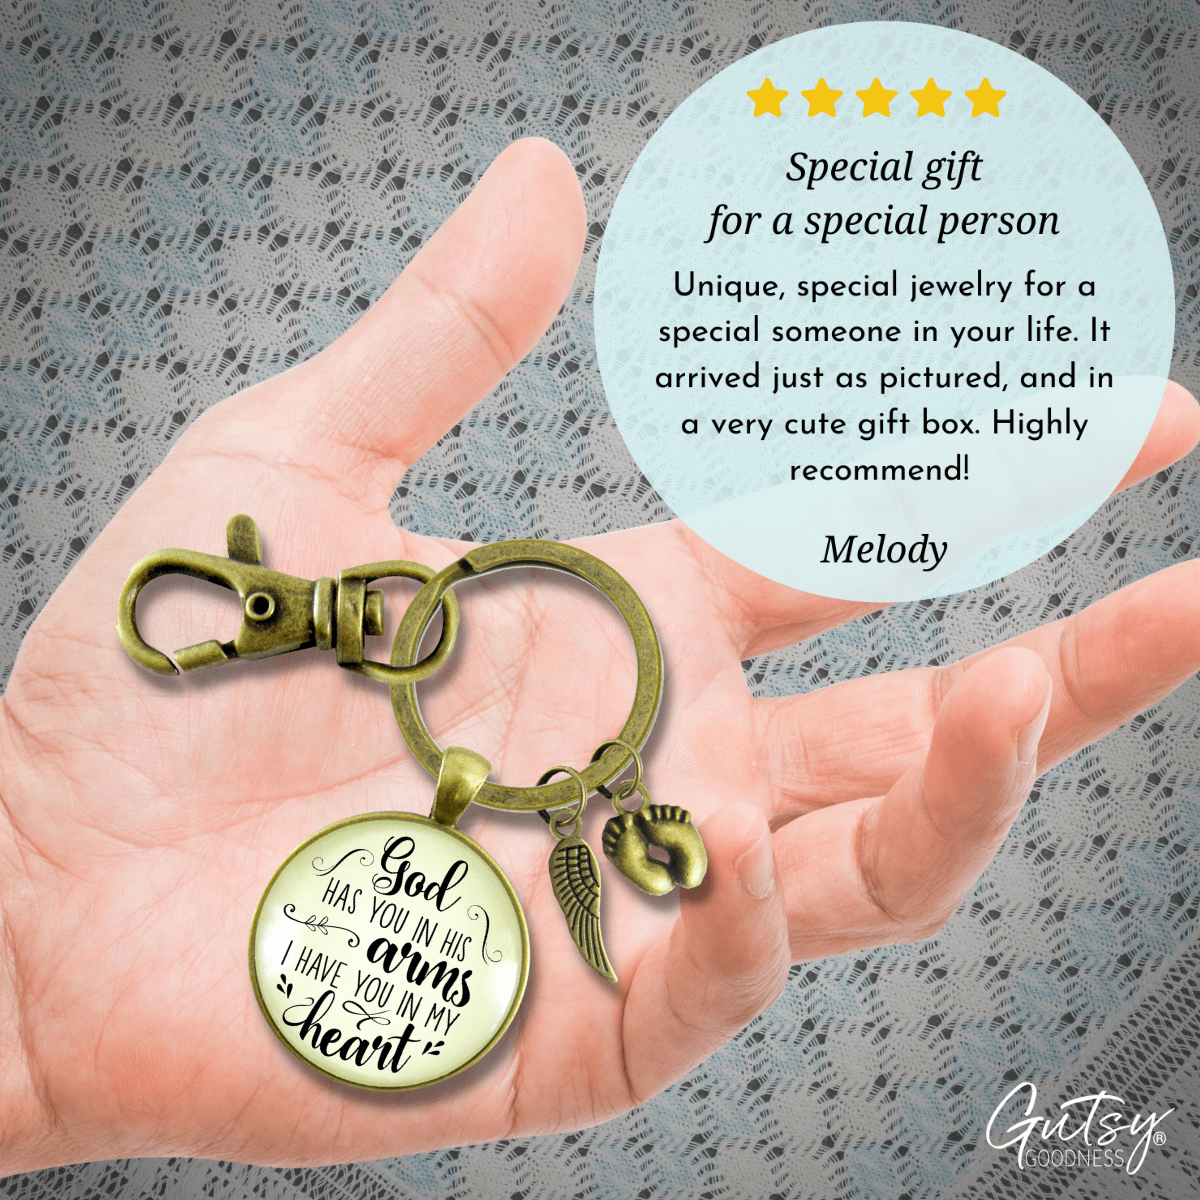 Baby Loss Memorial Keychain For Dad God Has You In Arms Heart Miscarriage Jewel Gift - Gutsy Goodness